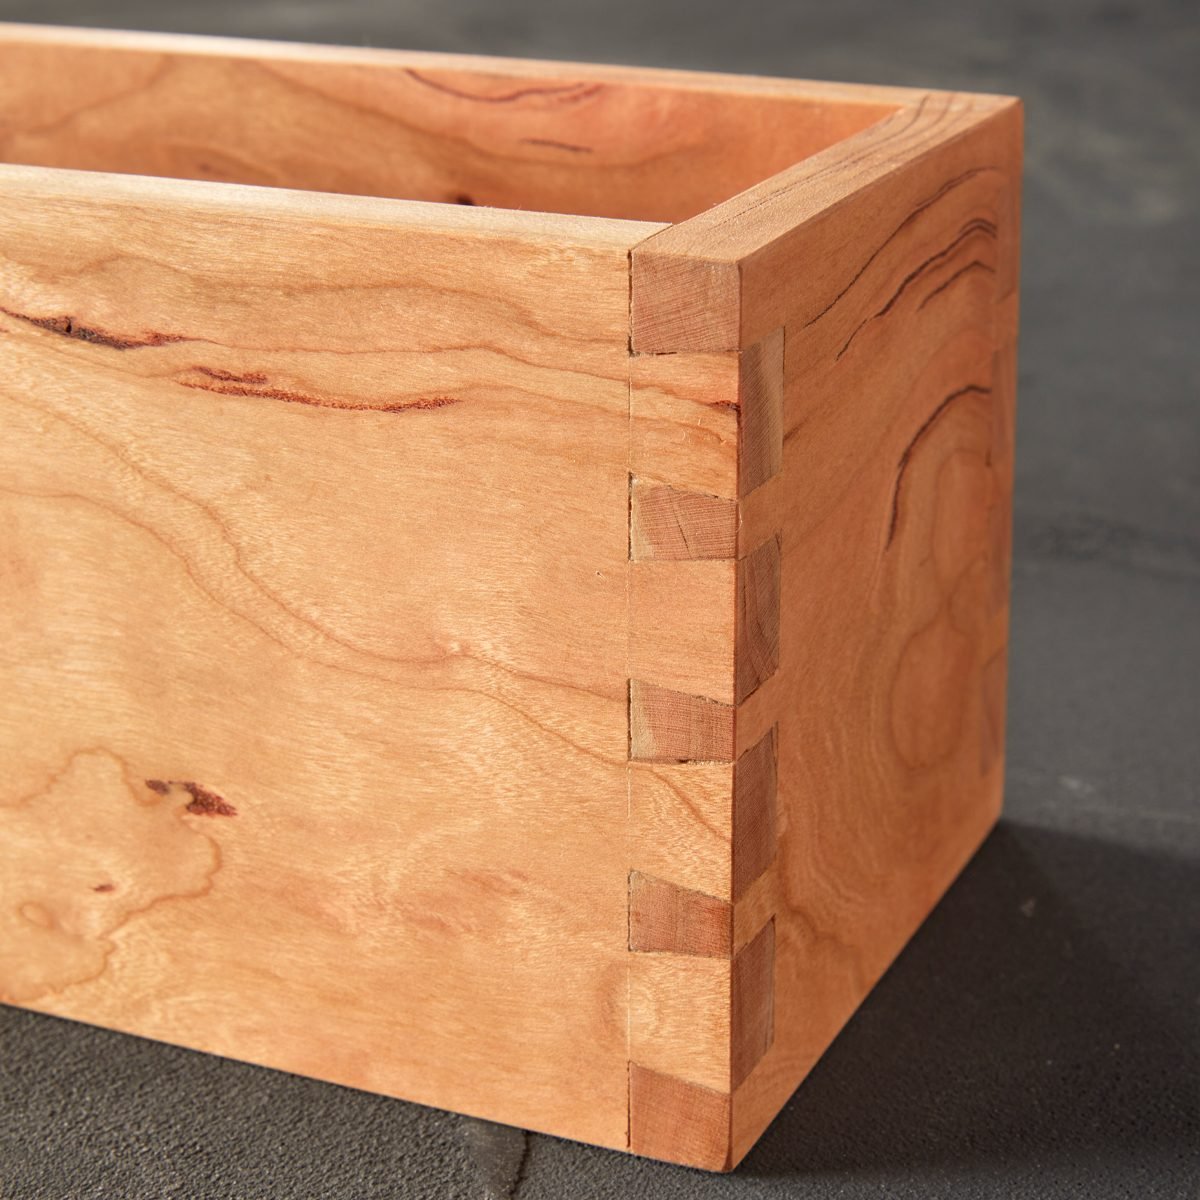 Fh23djf 622 50 052 How To Hand Cut Dovetail Joints